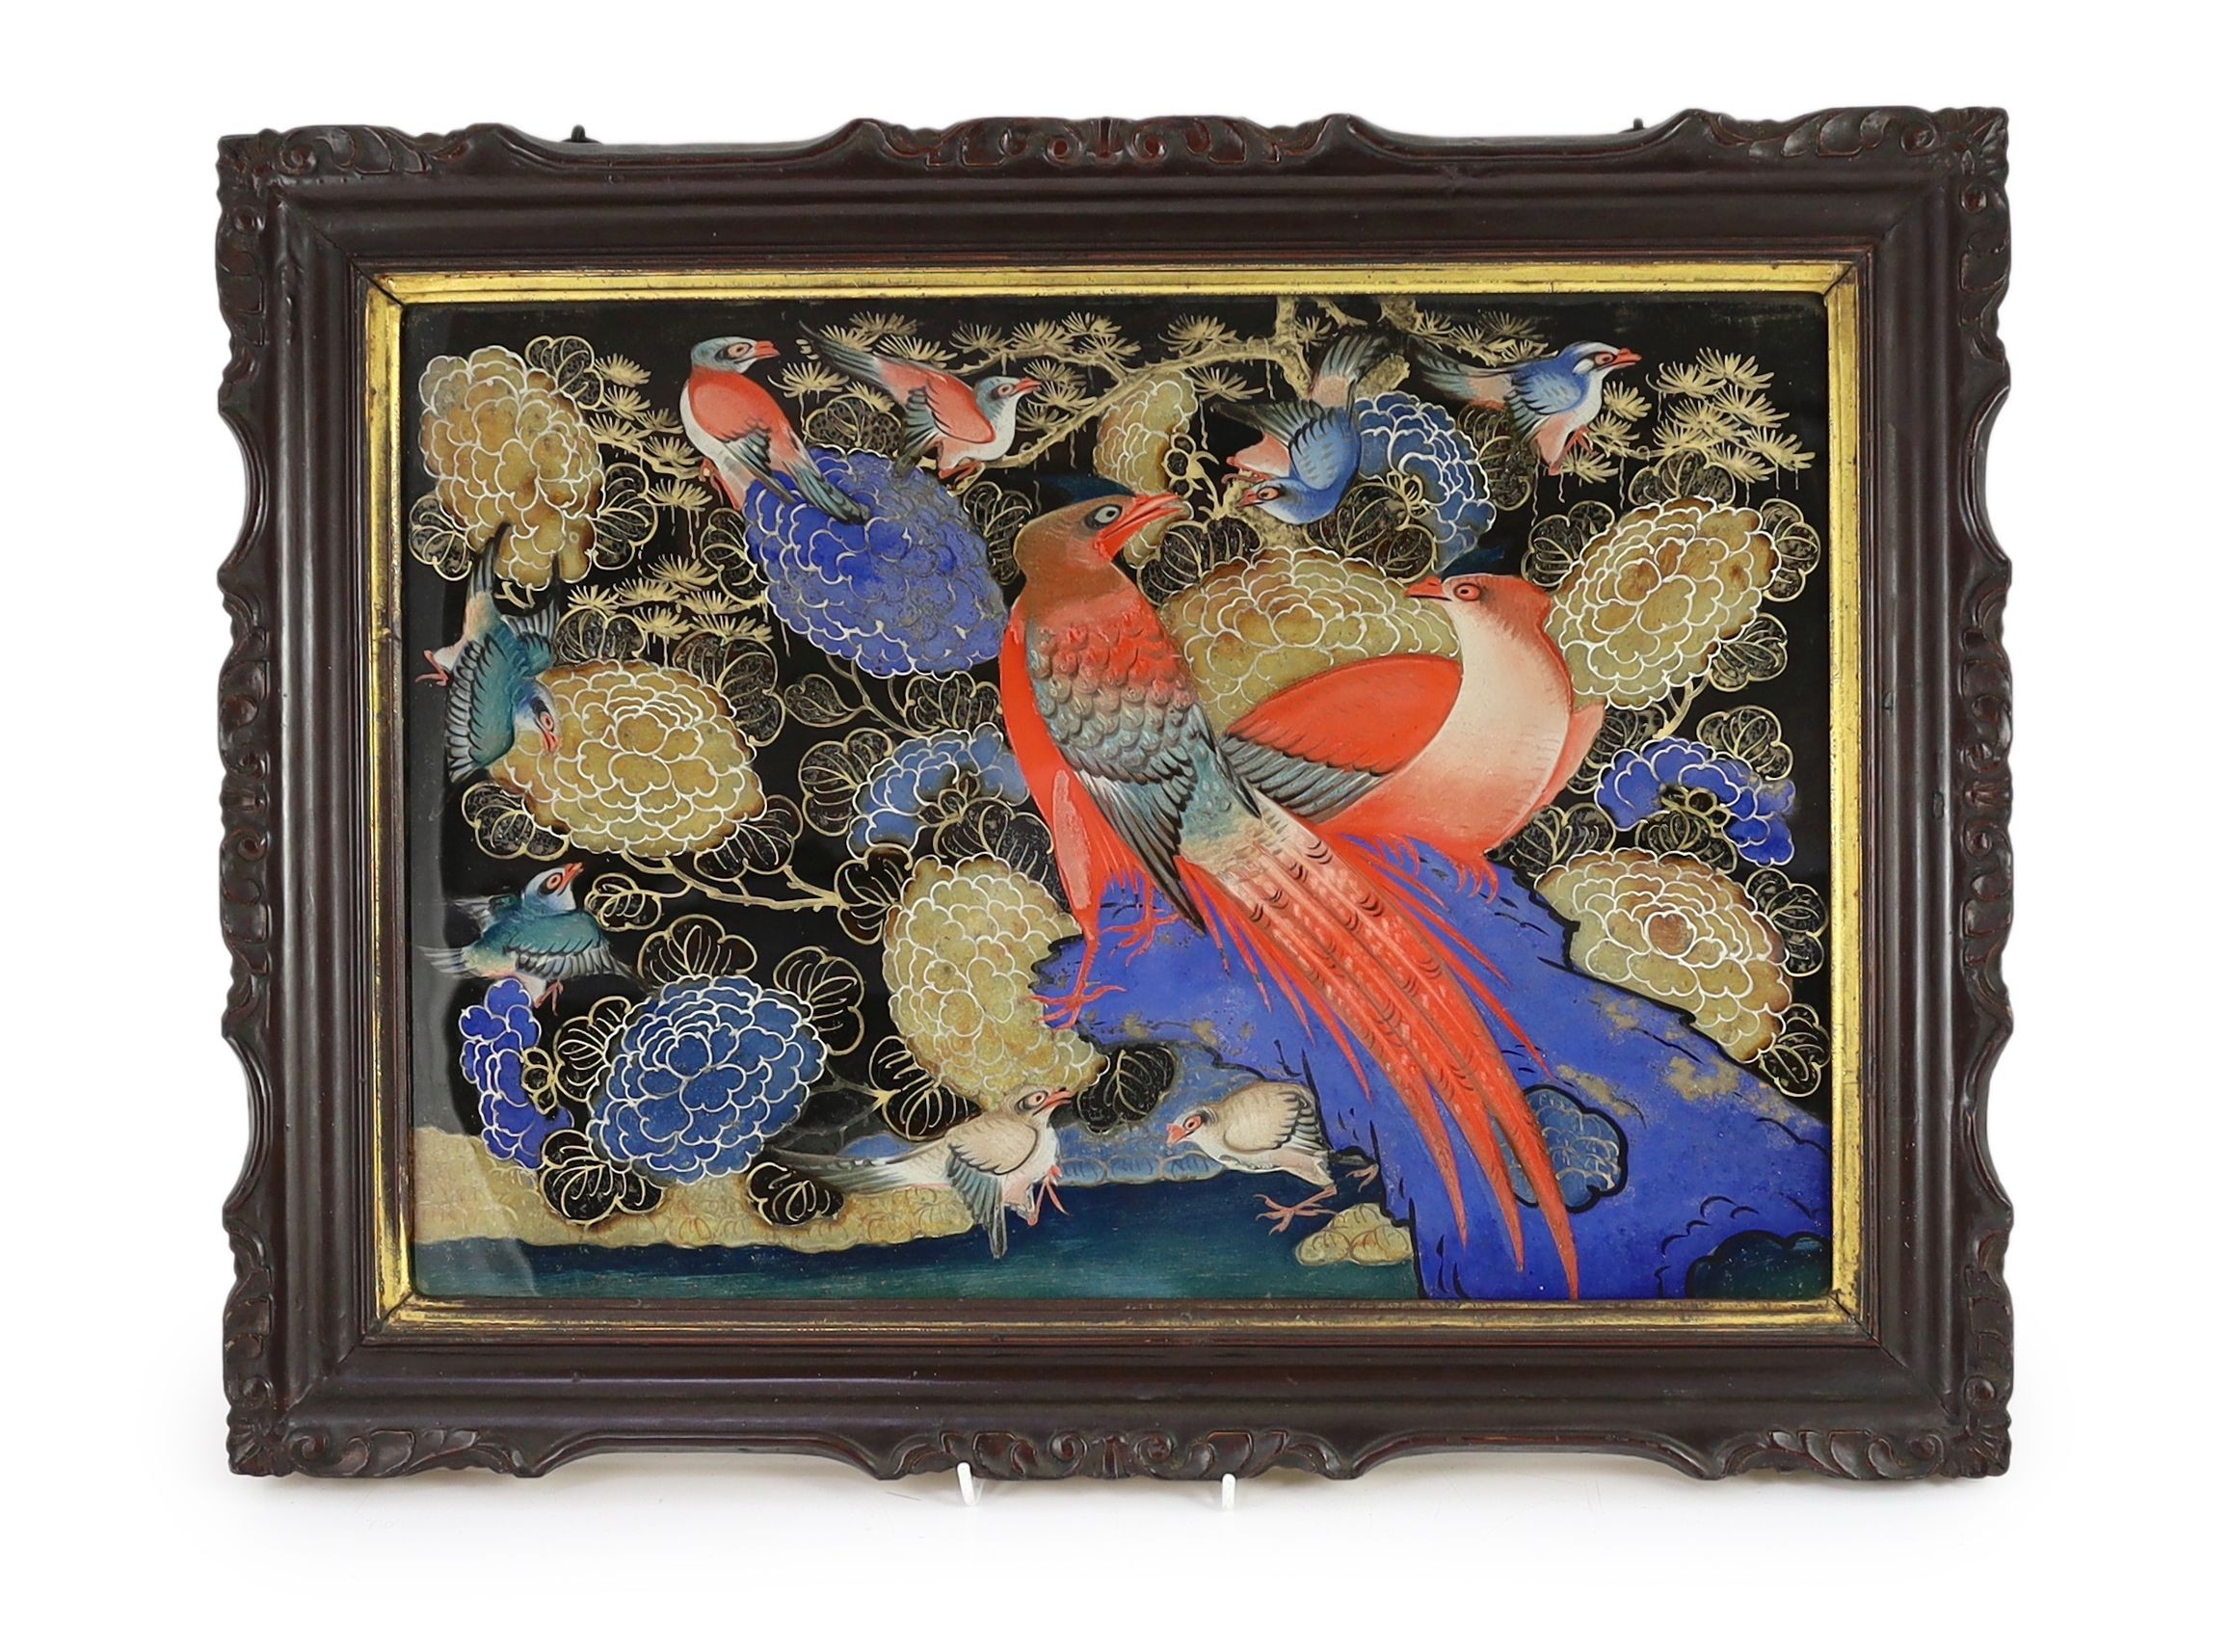 An unusual Korean reverse painted glass picture, 19th century, decorated with colourful birds amid flowers on a black ground, in original lacquered wood frame, 35 x 50cm